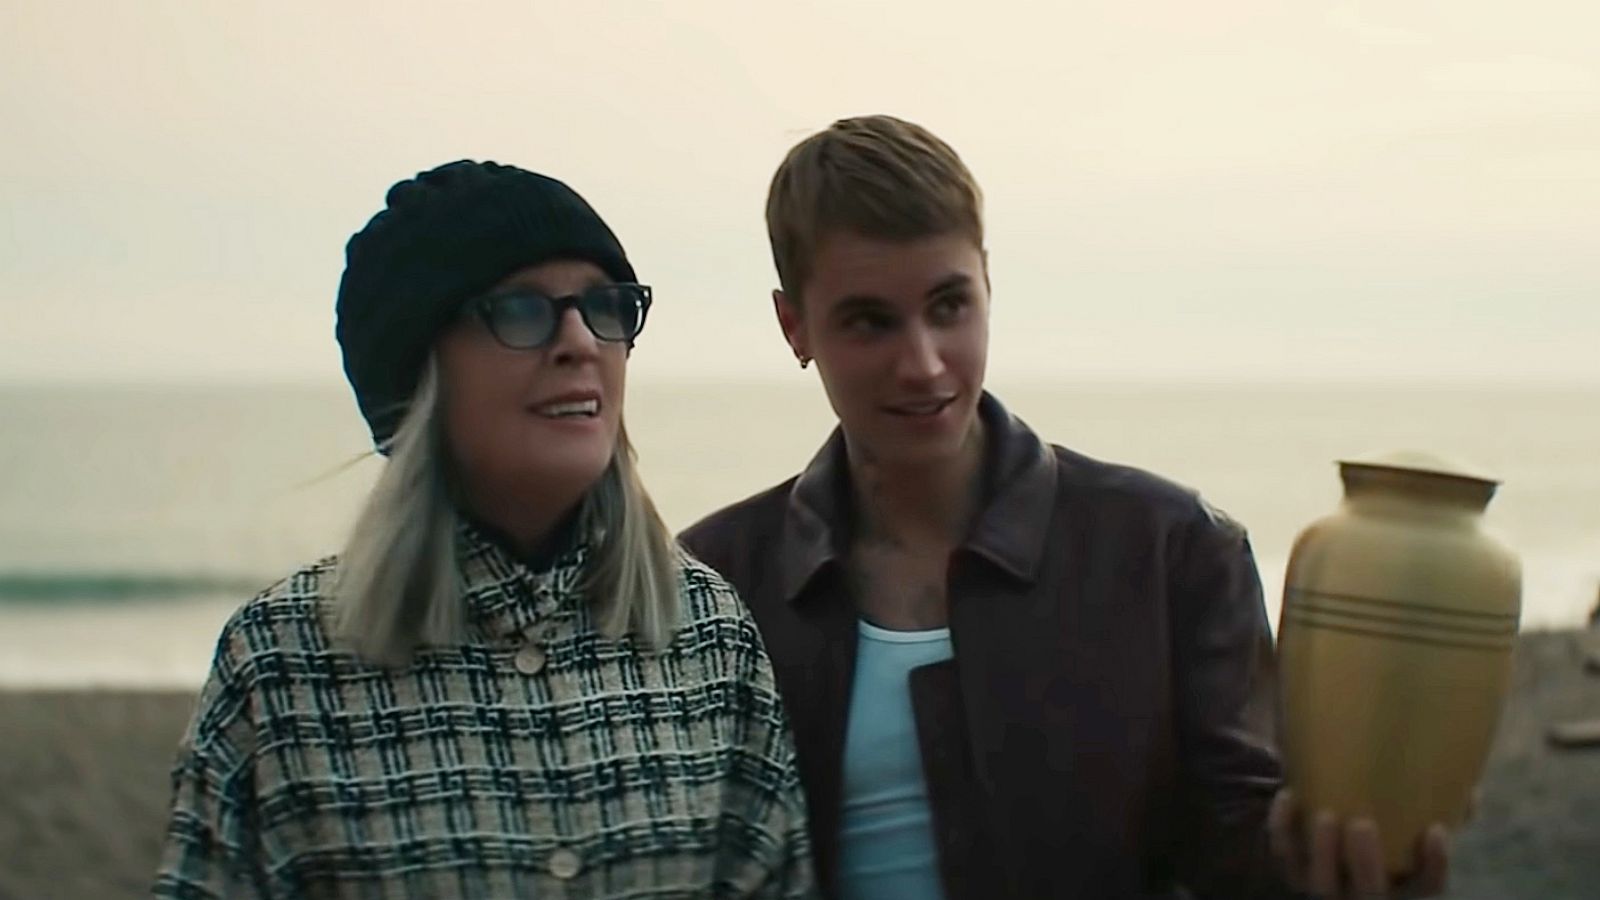 Justin Bieber Releases Ghost Music Video Starring Diane Keaton - CelebMix